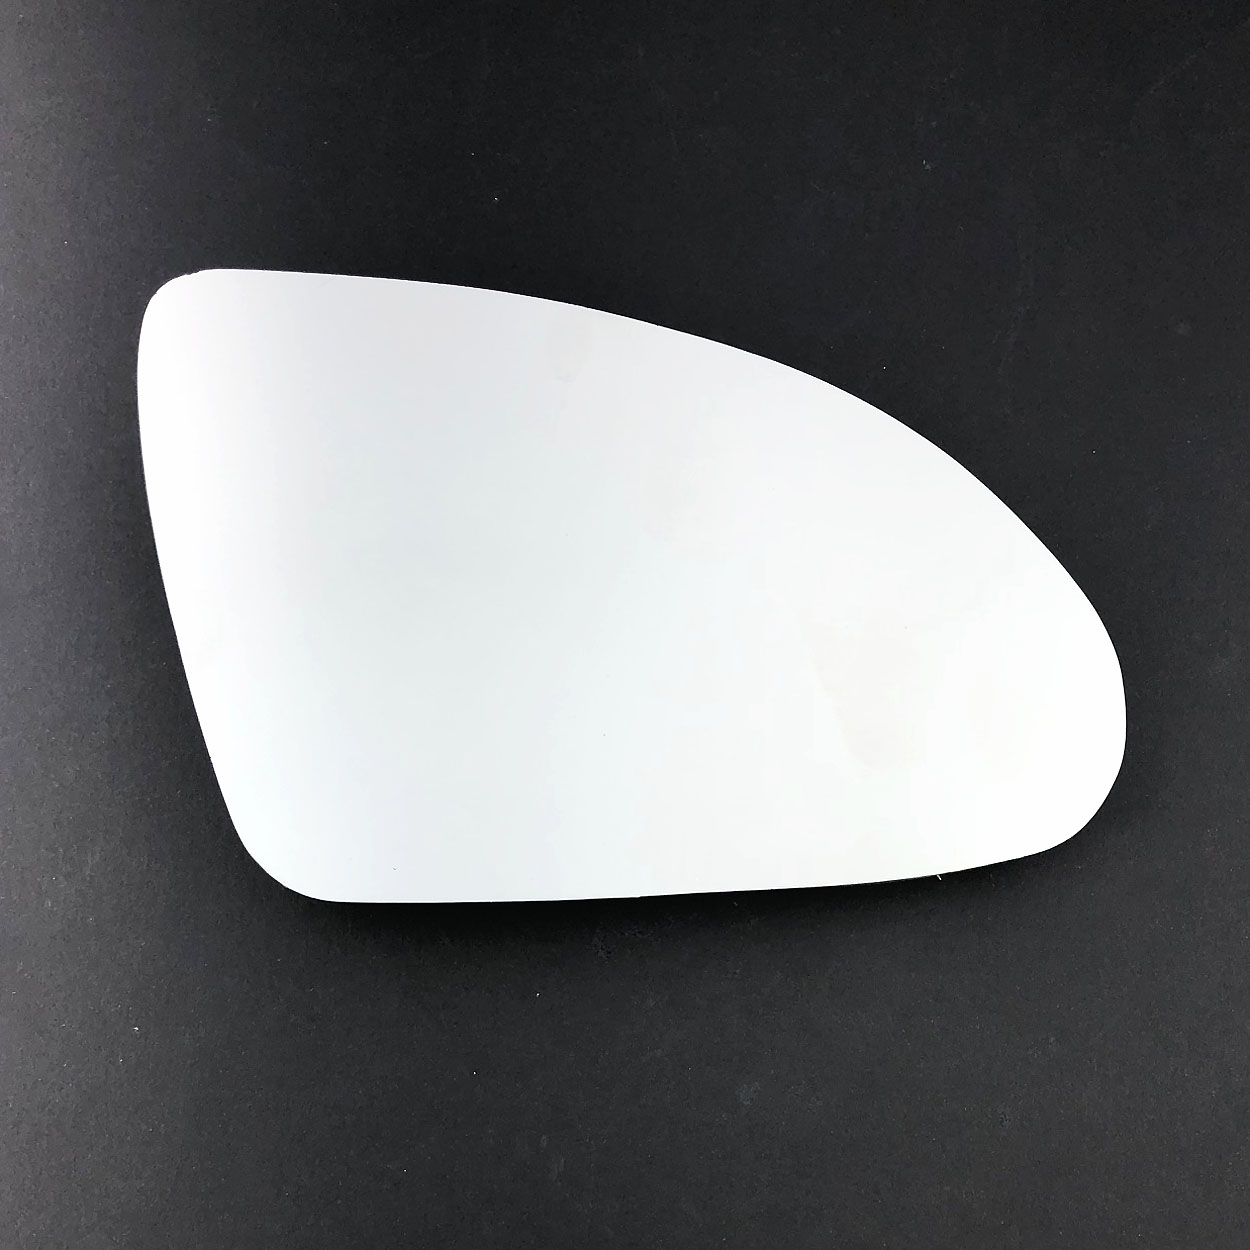 Lexus ES 300 Wing Mirror Glass RIGHT HAND ( UK Driver Side ) 2015 to 2020 – Wide Angle Wing Mirror